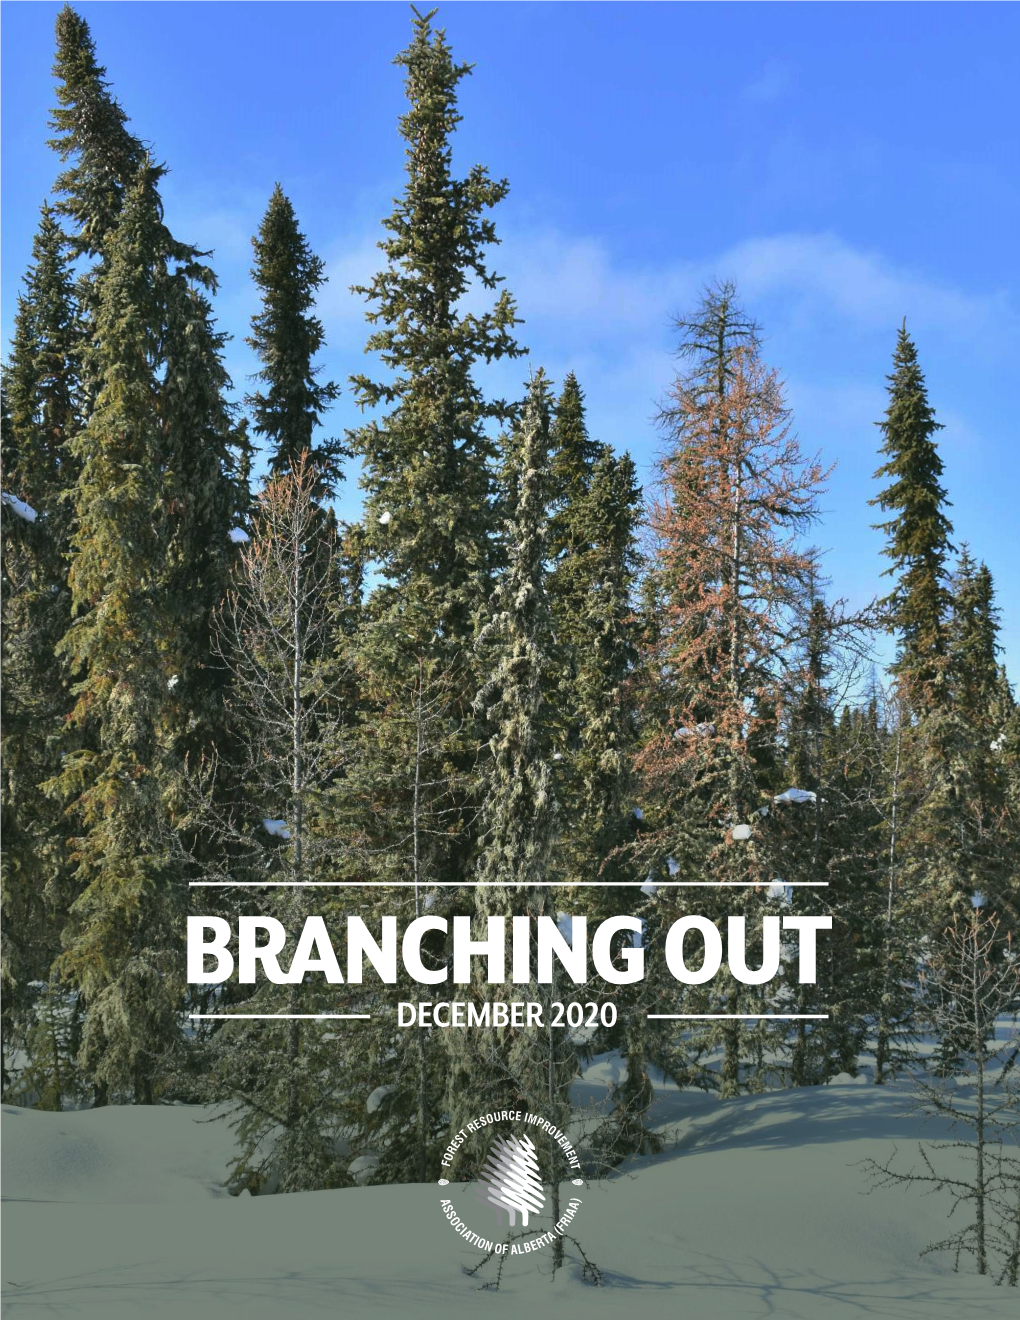 Branching out – December 2020